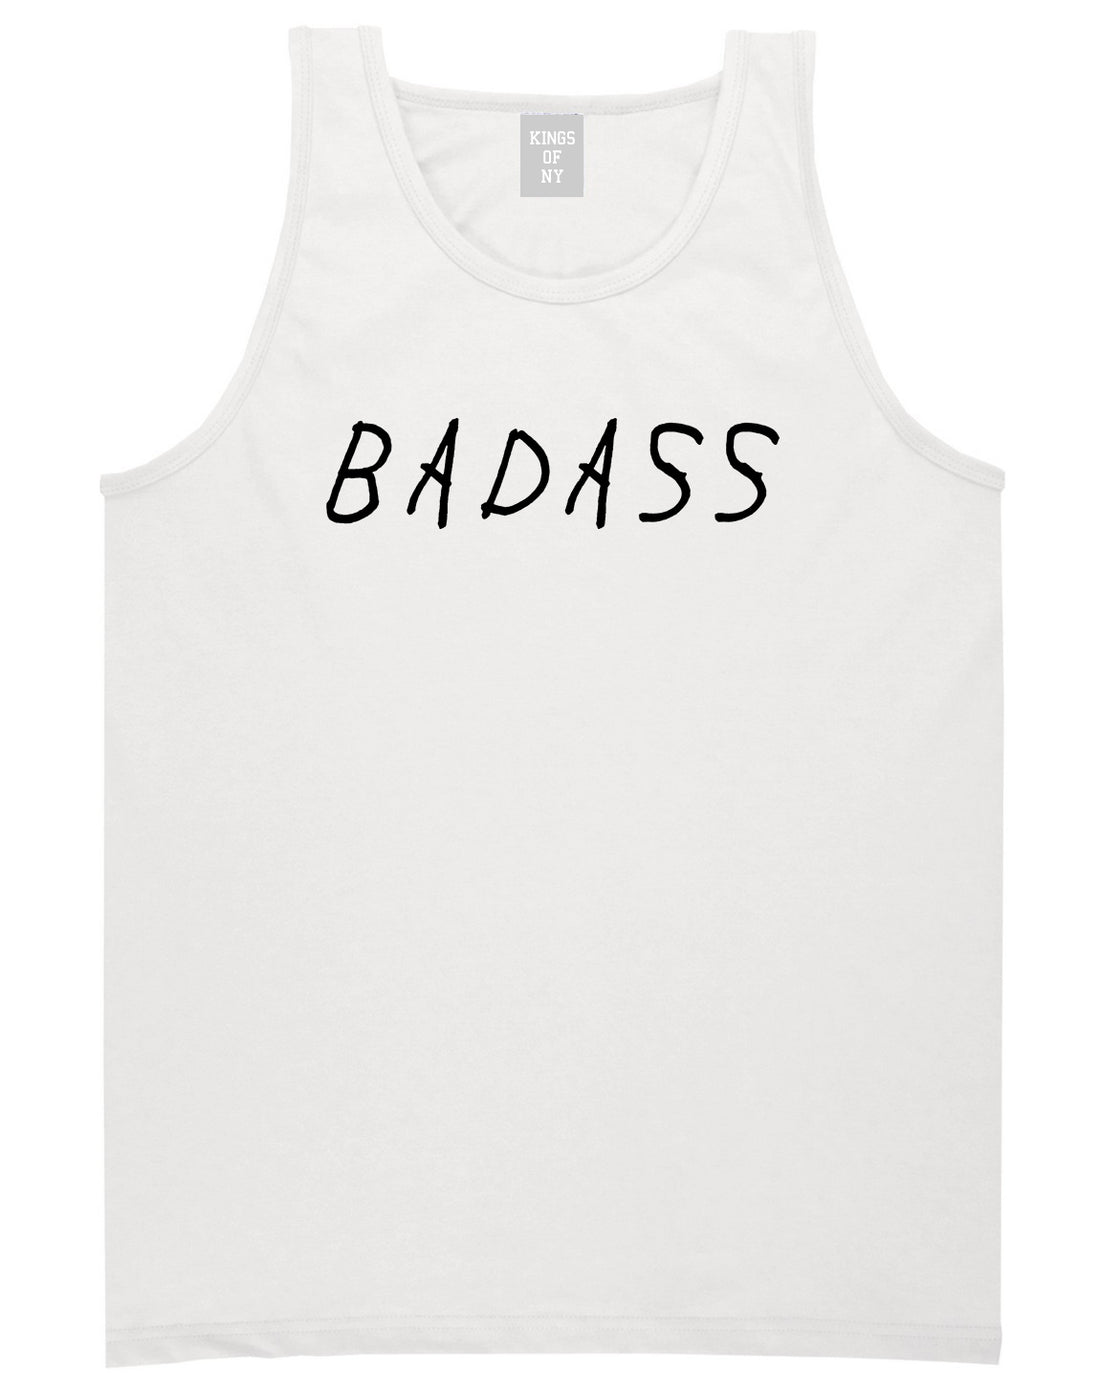 Badass White Tank Top Shirt by Kings Of NY